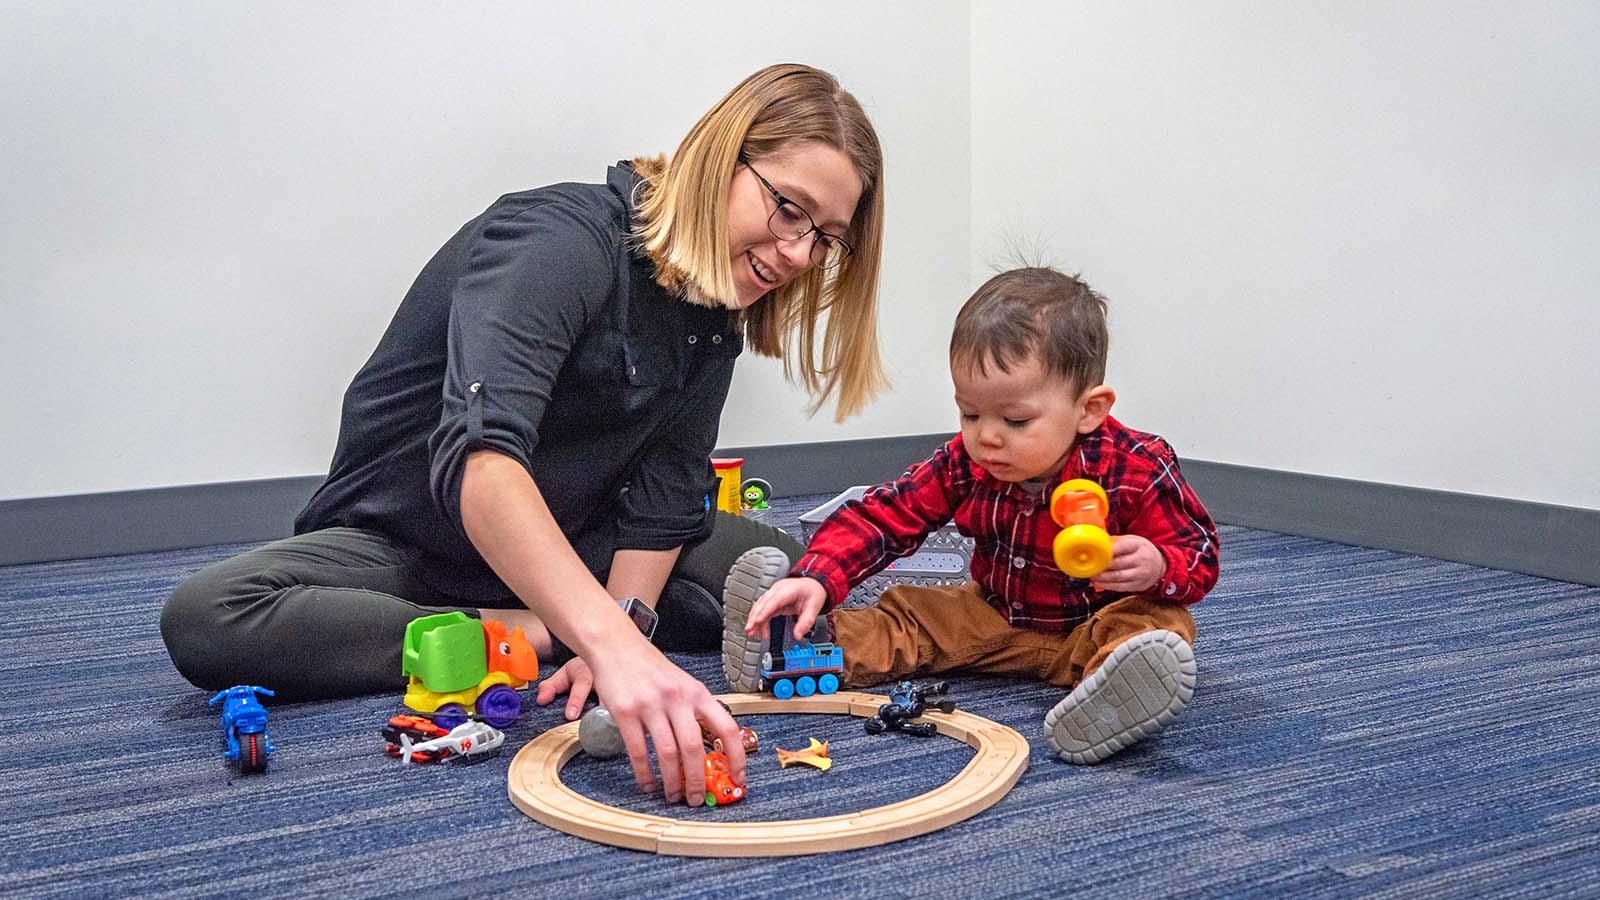 Speech-language pathology student sitting on floor with toddler client and playing with toys